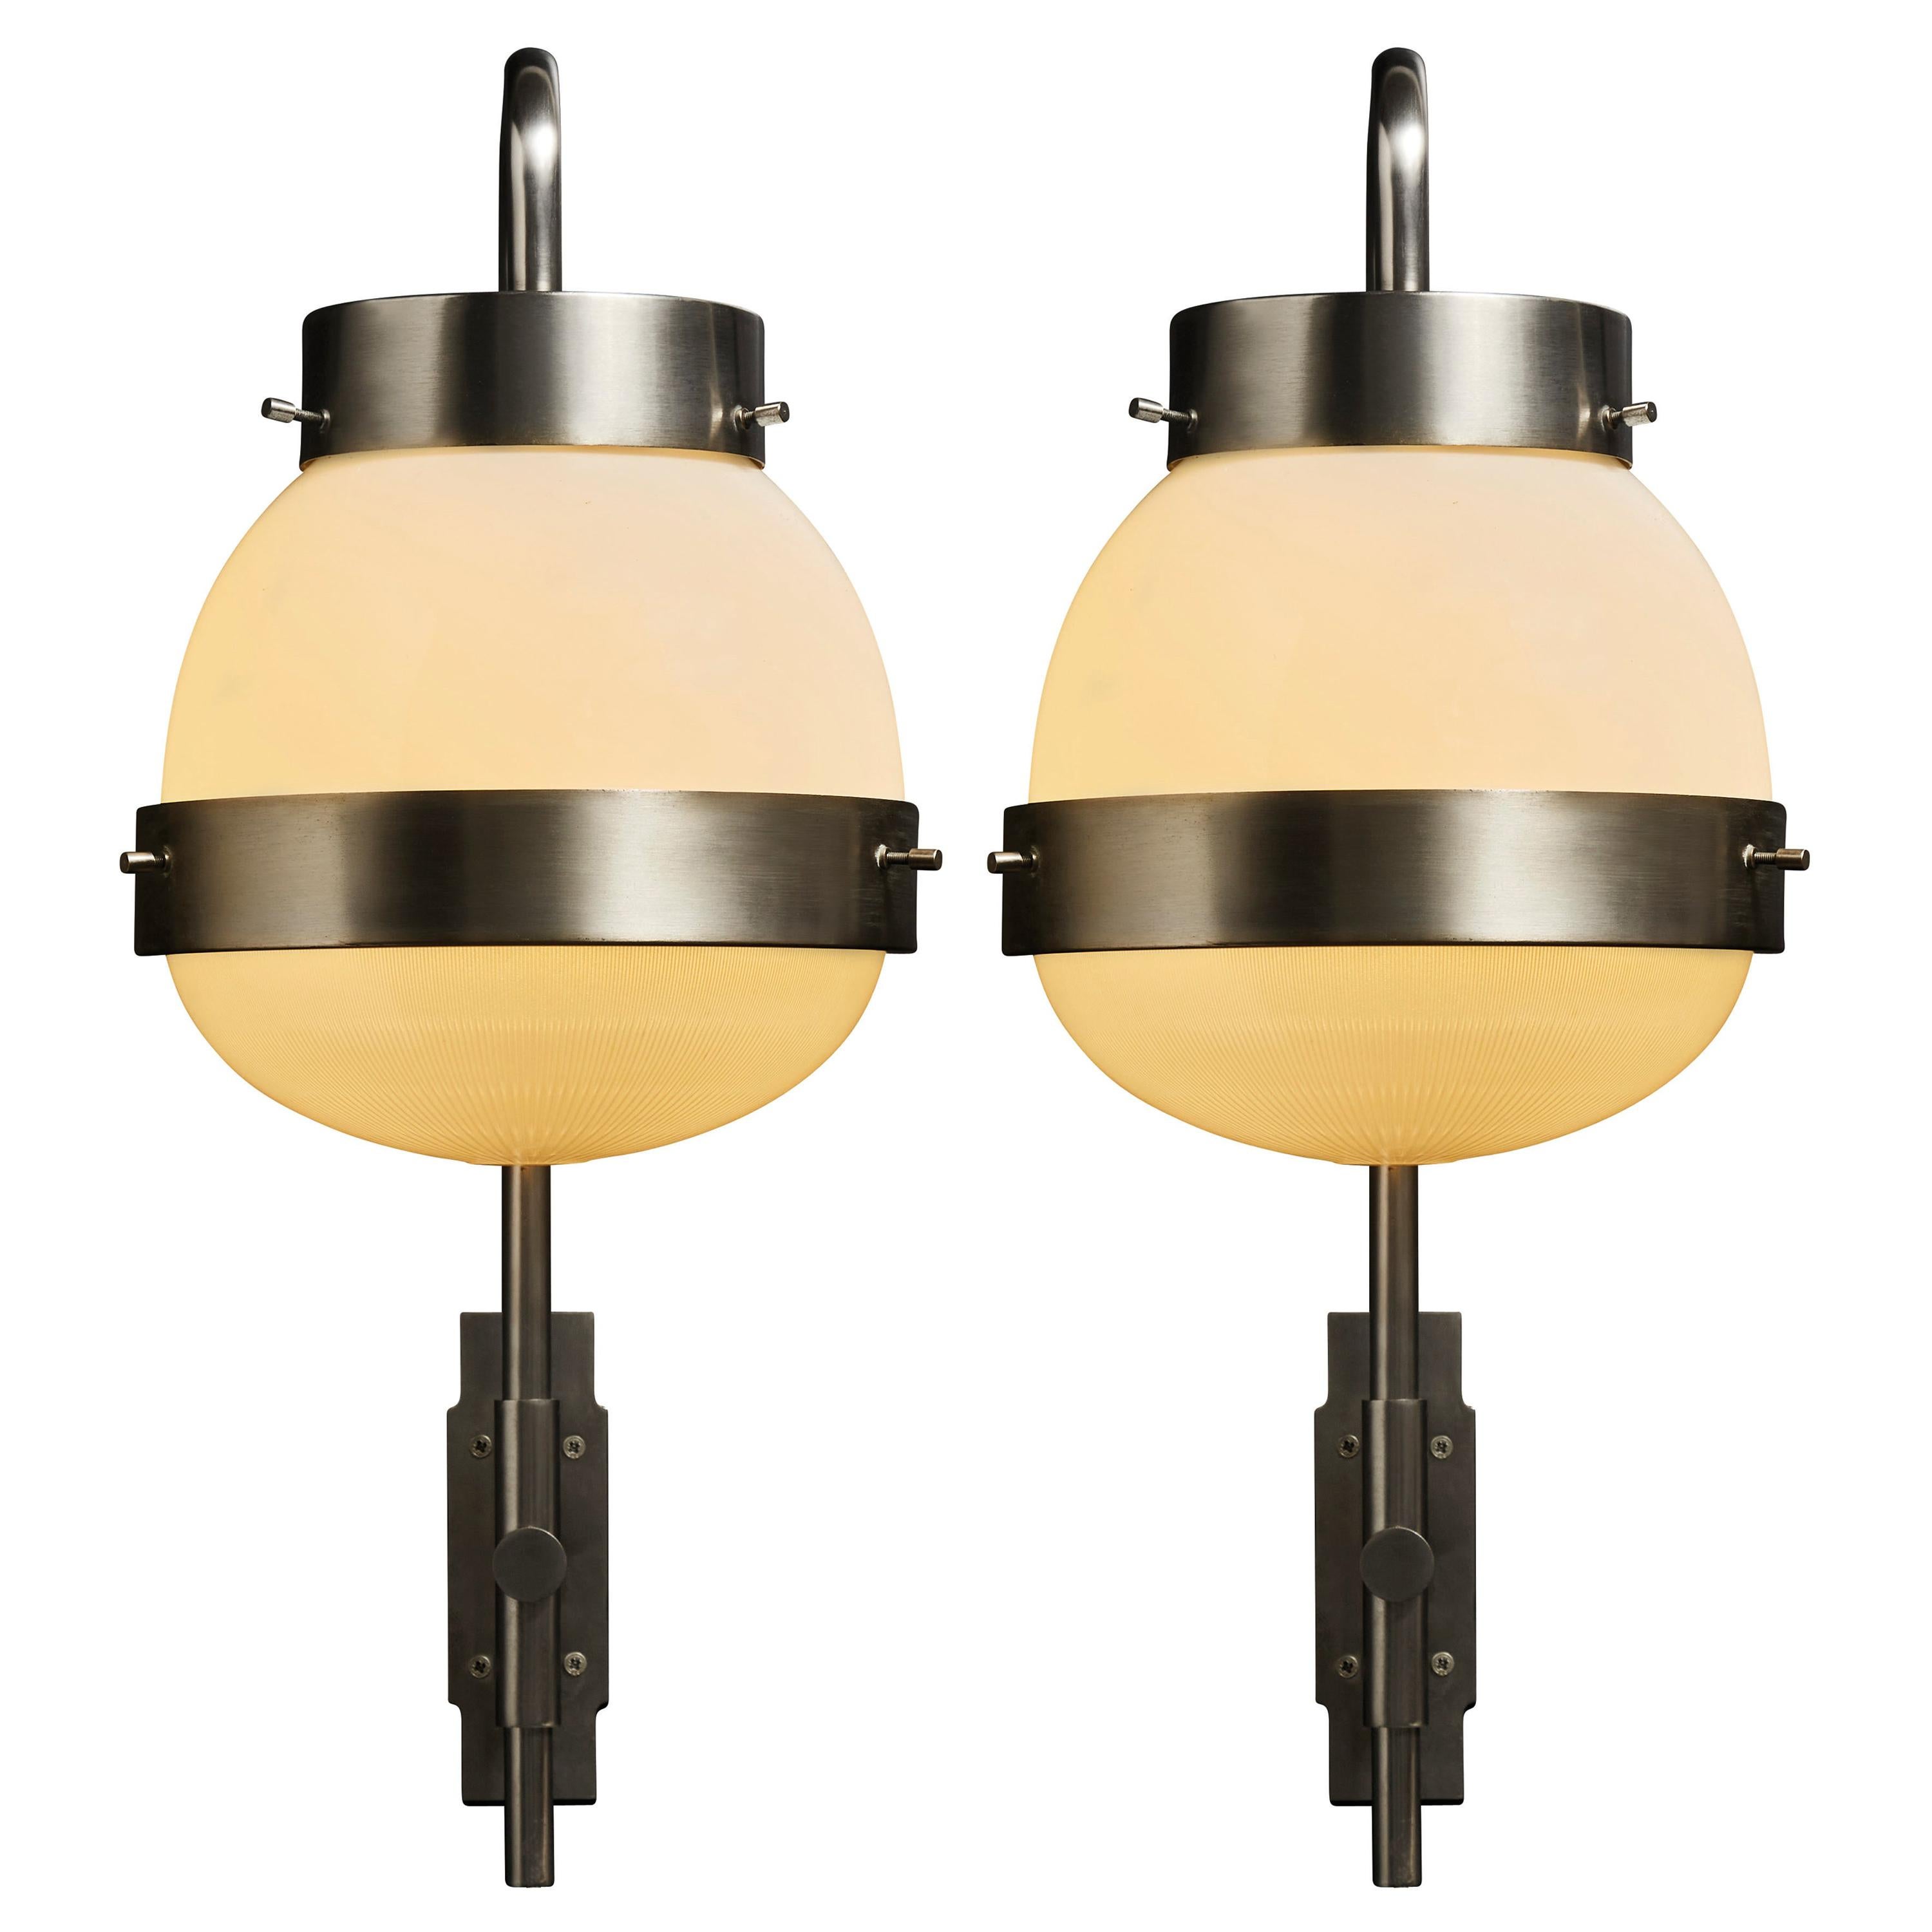 Five Large Delta Wall Sconces by Sergio Mazza for Artemide